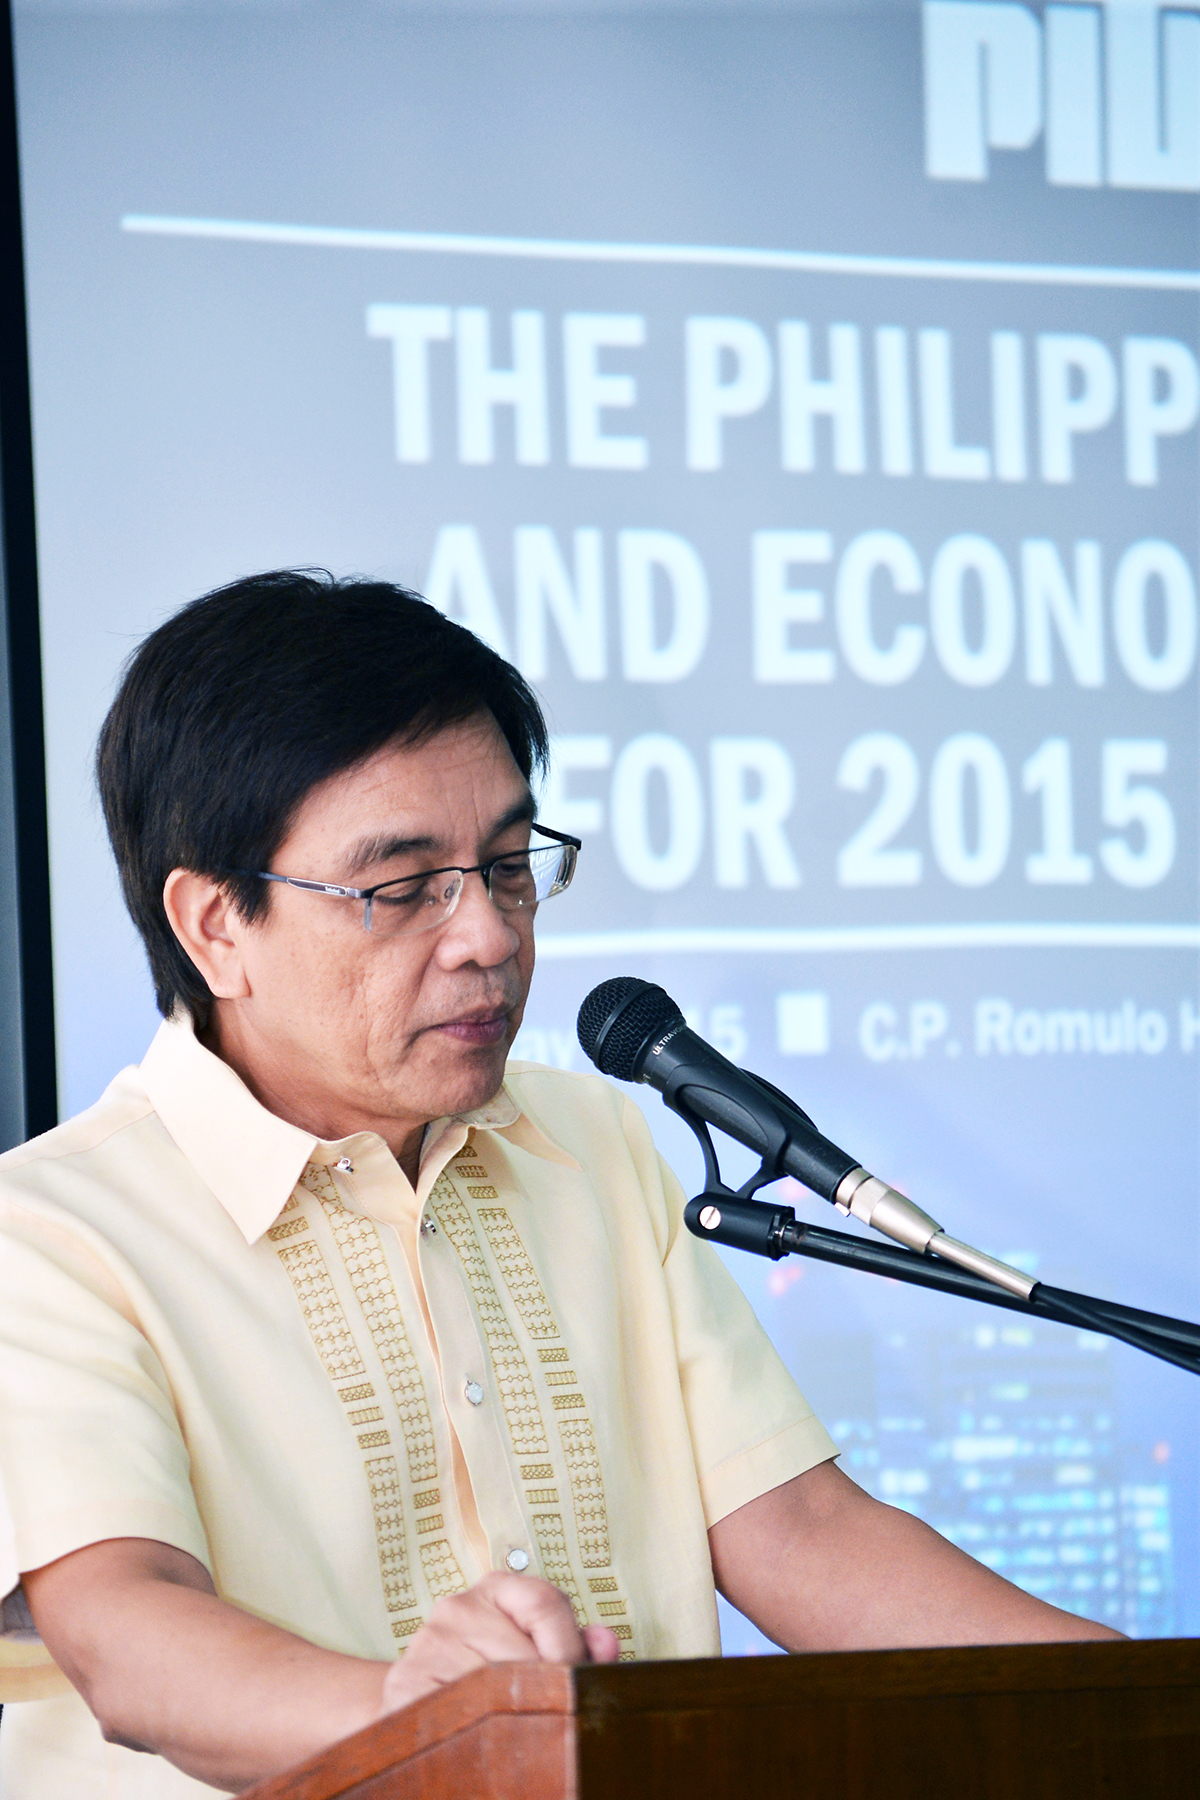 The Philippine Business and Economic Outlook for 2015 and Beyond-DSC_2931.jpg